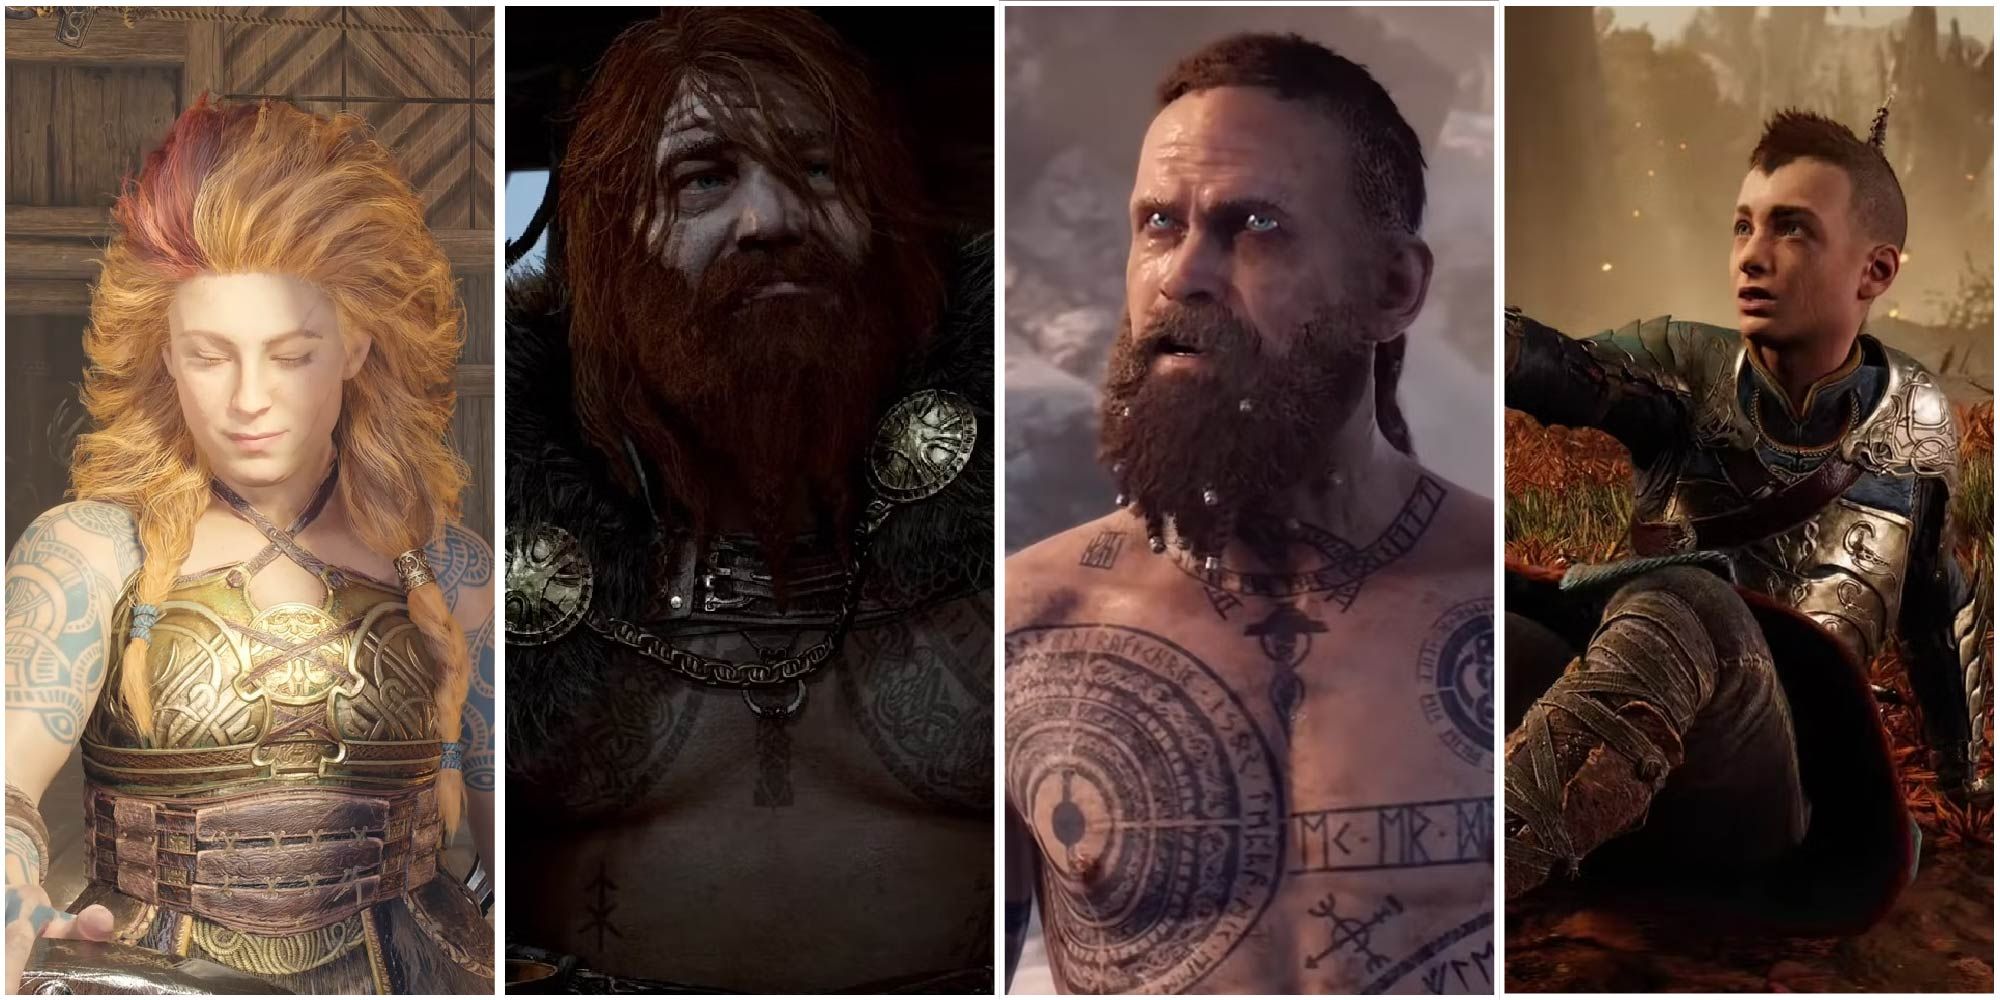 God Of War Ragnarok: Things About Odin The Game Changes From Norse Mythology